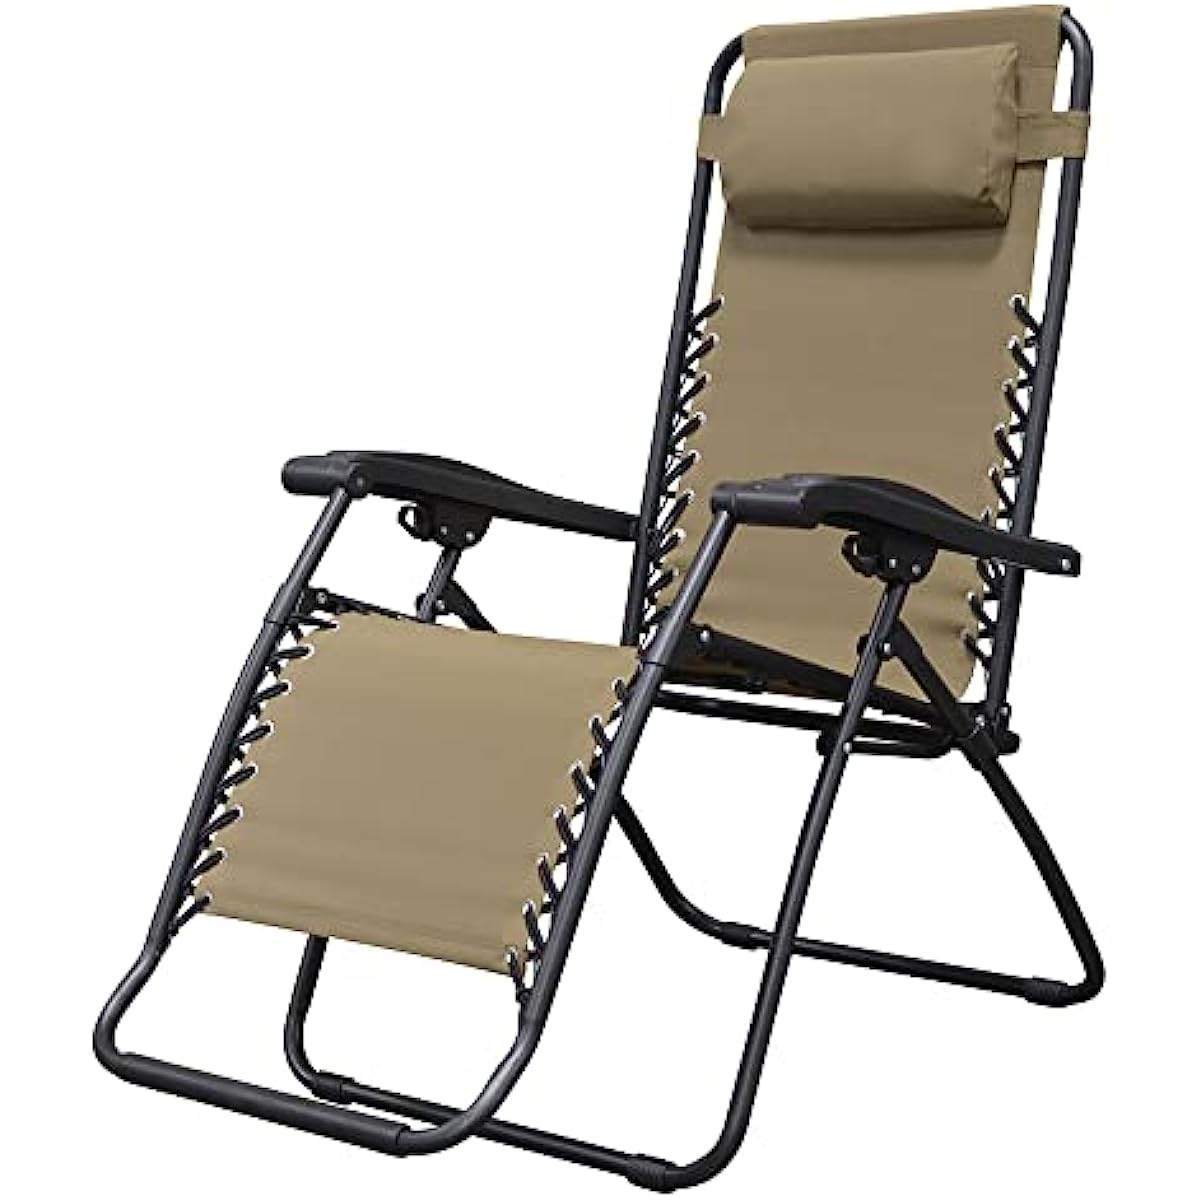 

Caravan Sports Zero Gravity Outdoor Portable Folding Camping Lawn Deck Patio Pool Recliner Lounge Chair for Adults Adjustable Headrest Beige